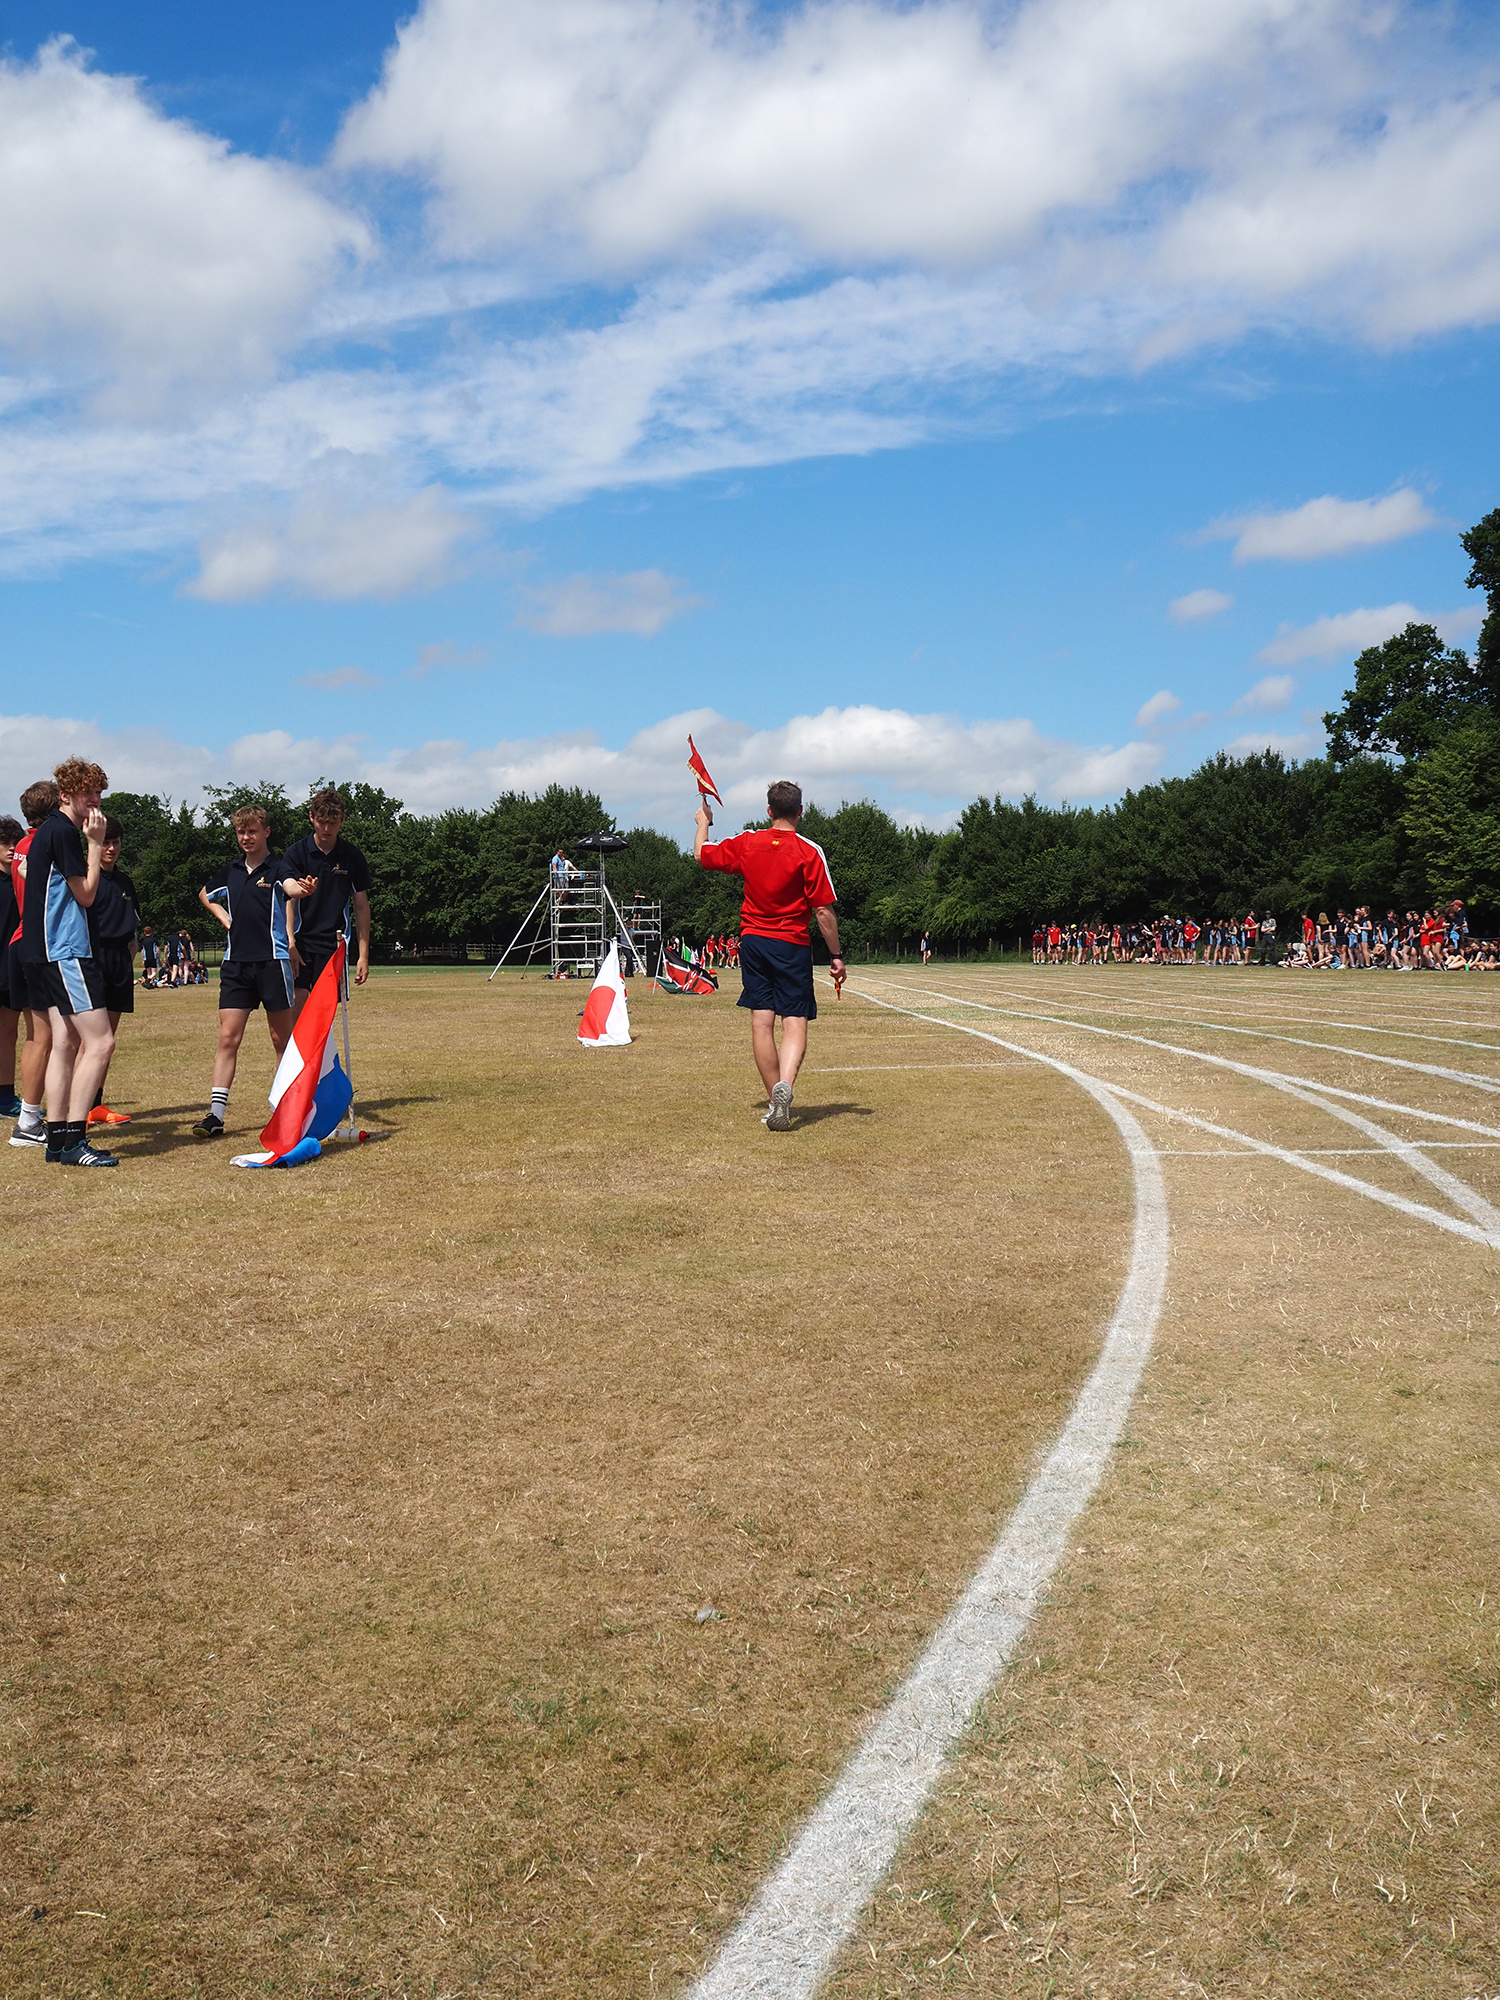 sports day 2022